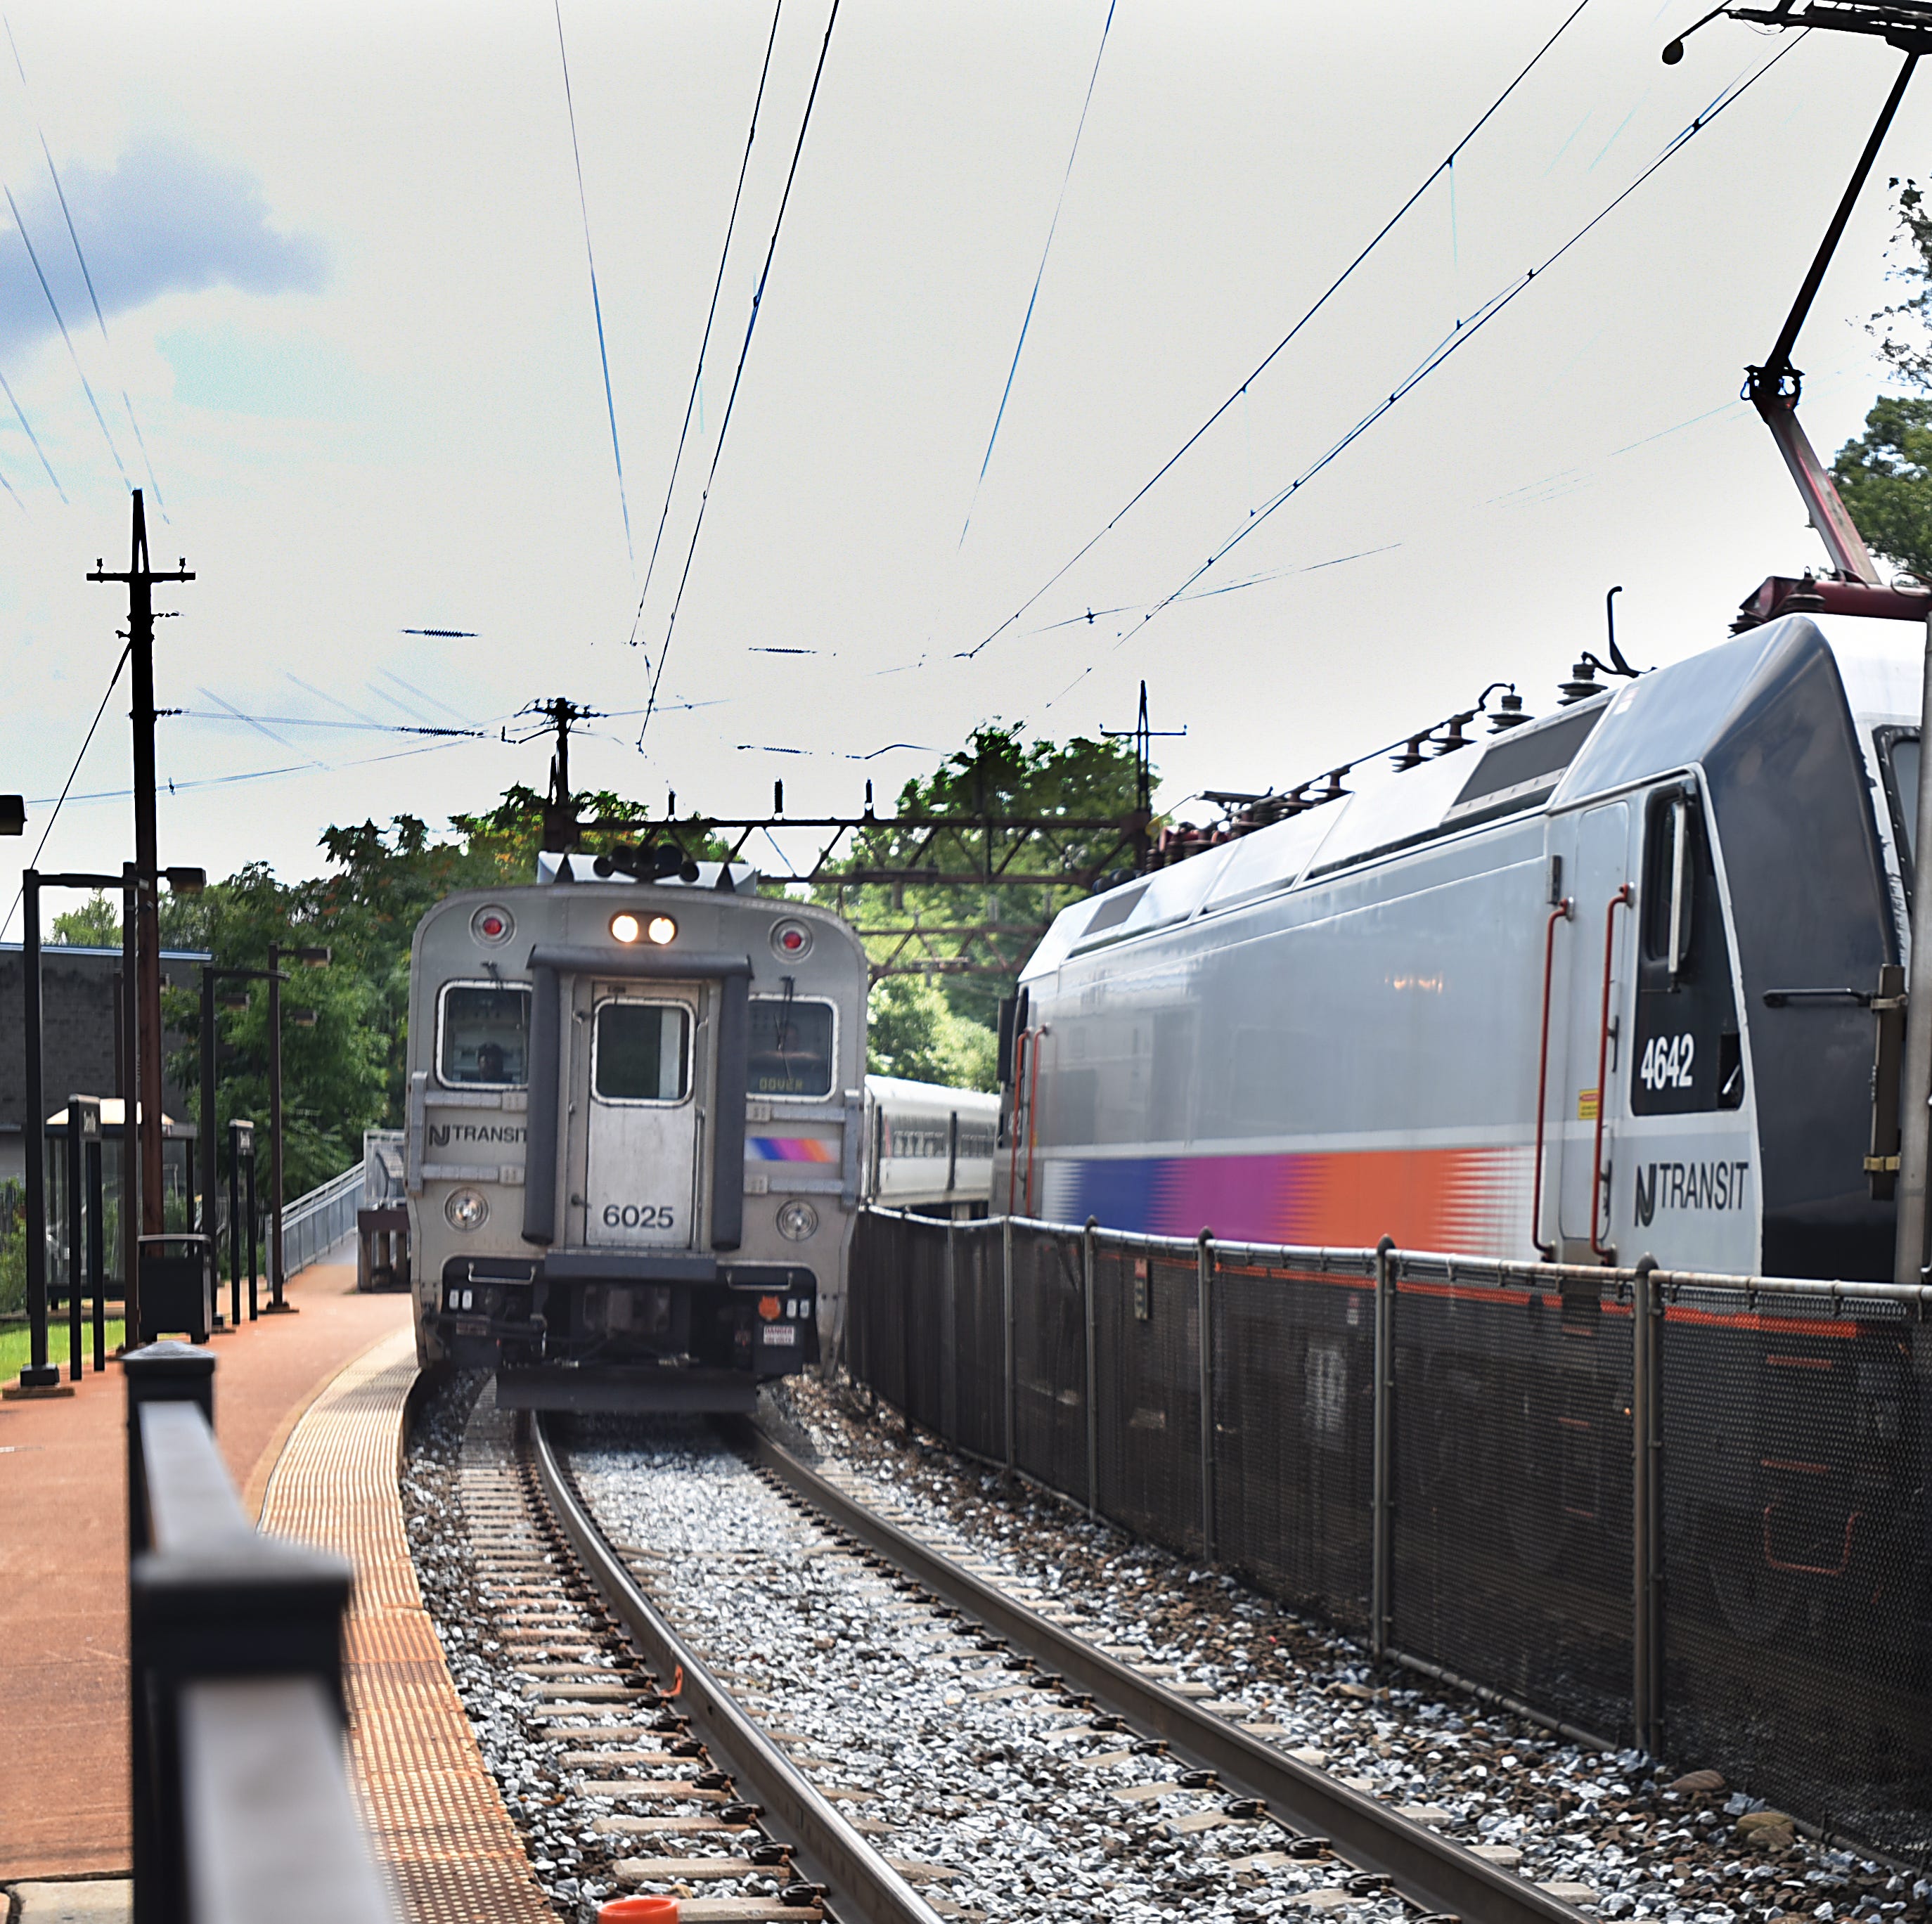 Engineer says in lawsuit she was fired after raising NJ Transit train safety concerns